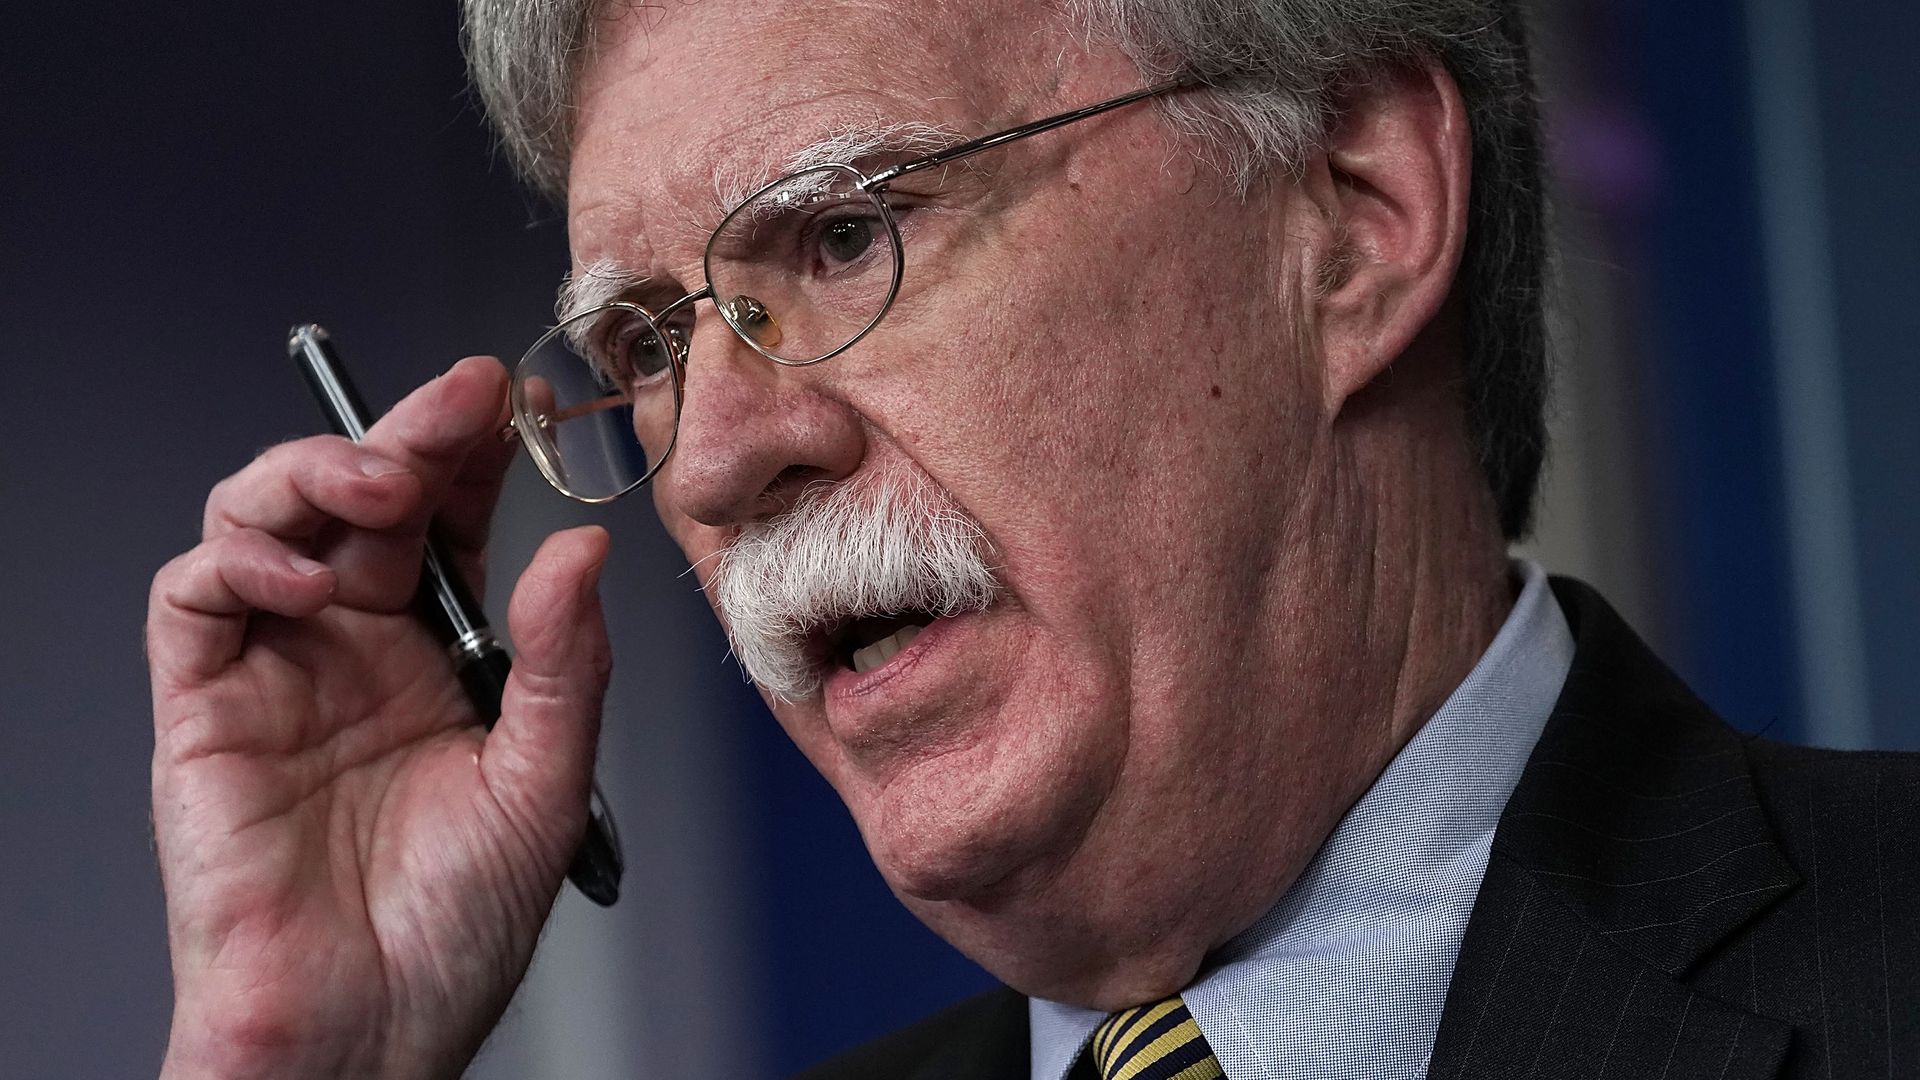 John Bolton says he's looking at new measures targeting the Venezuelan president's financial wherewithal.